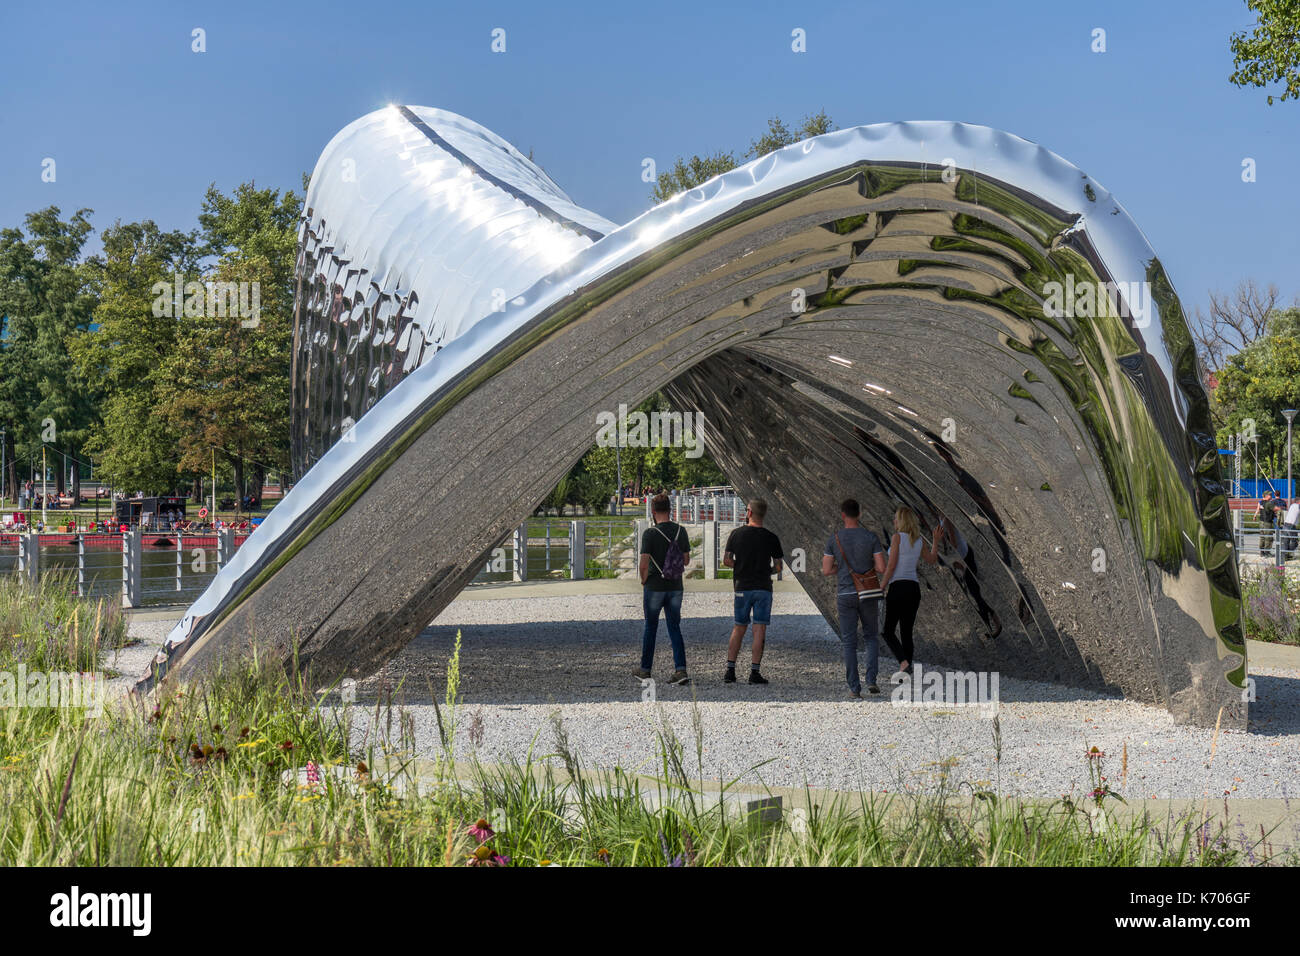 People inside the city sculpture called NAWA designed by Oskar Zięta on Daliowa island in downtown Wroclaw in 2017, Poland Stock Photo